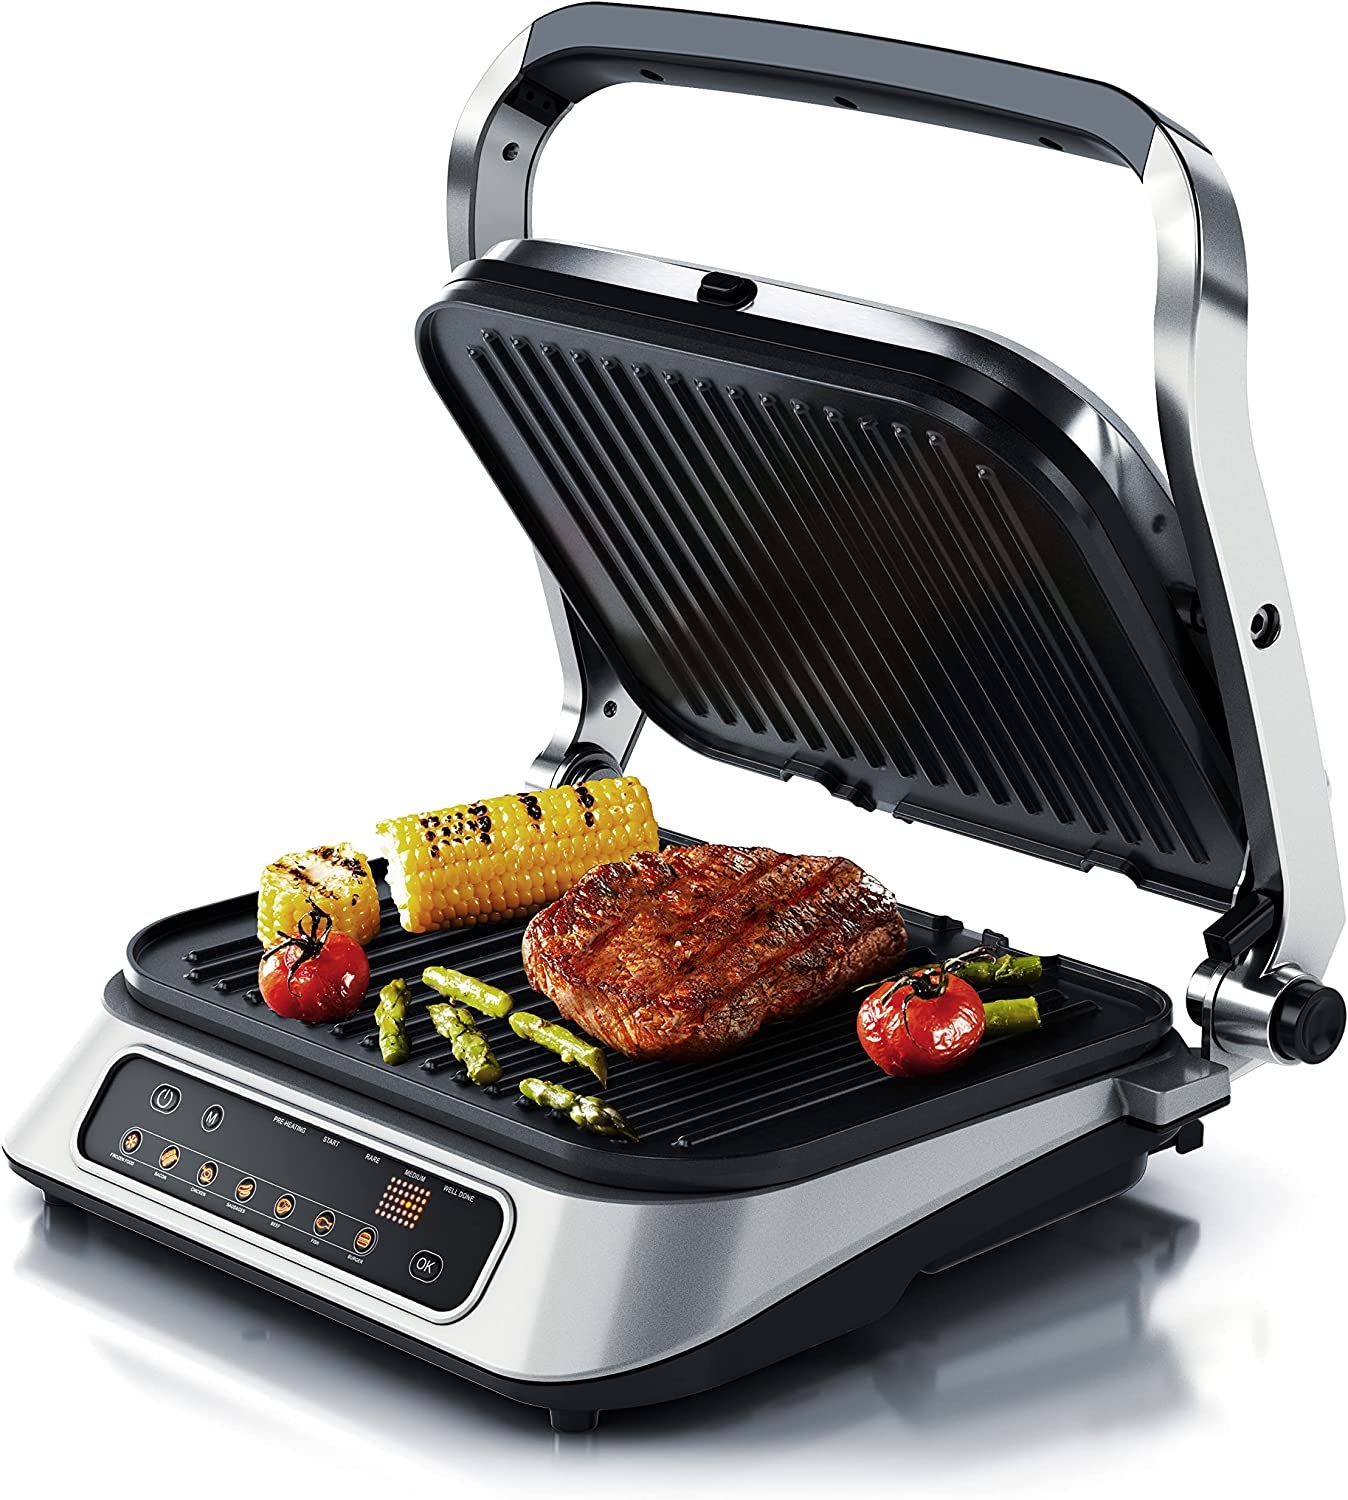 Arendo contact grill, electric grill with digital control, 1900 W, electric table grill sandwich maker, 7 programmes, non-stick coated stainless steel